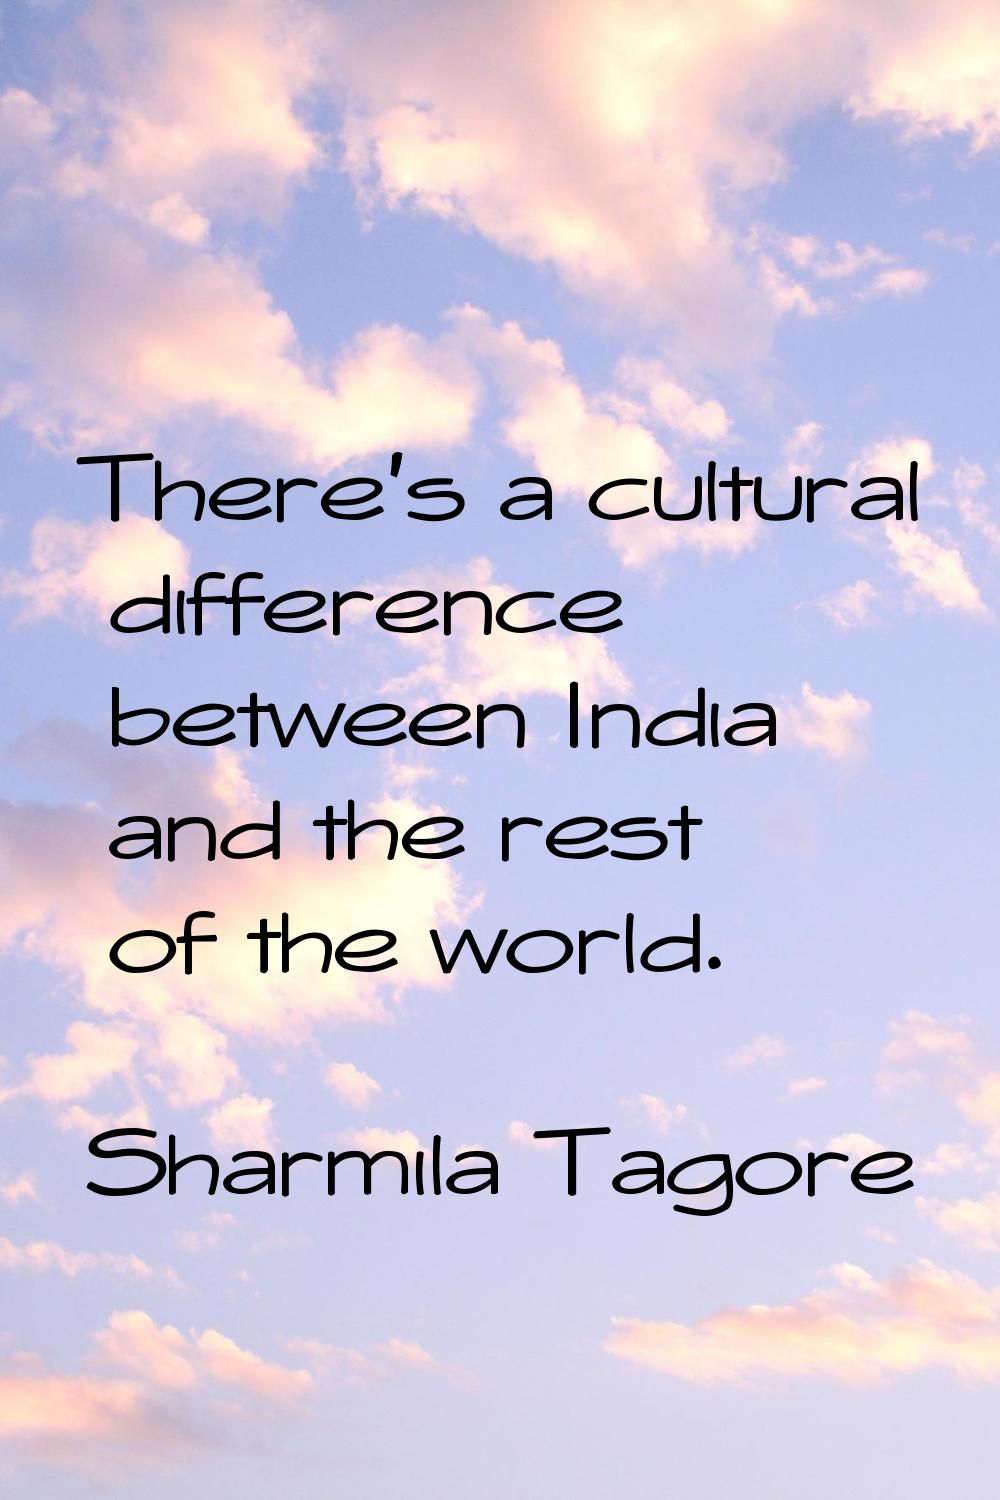 There's a cultural difference between India and the rest of the world.